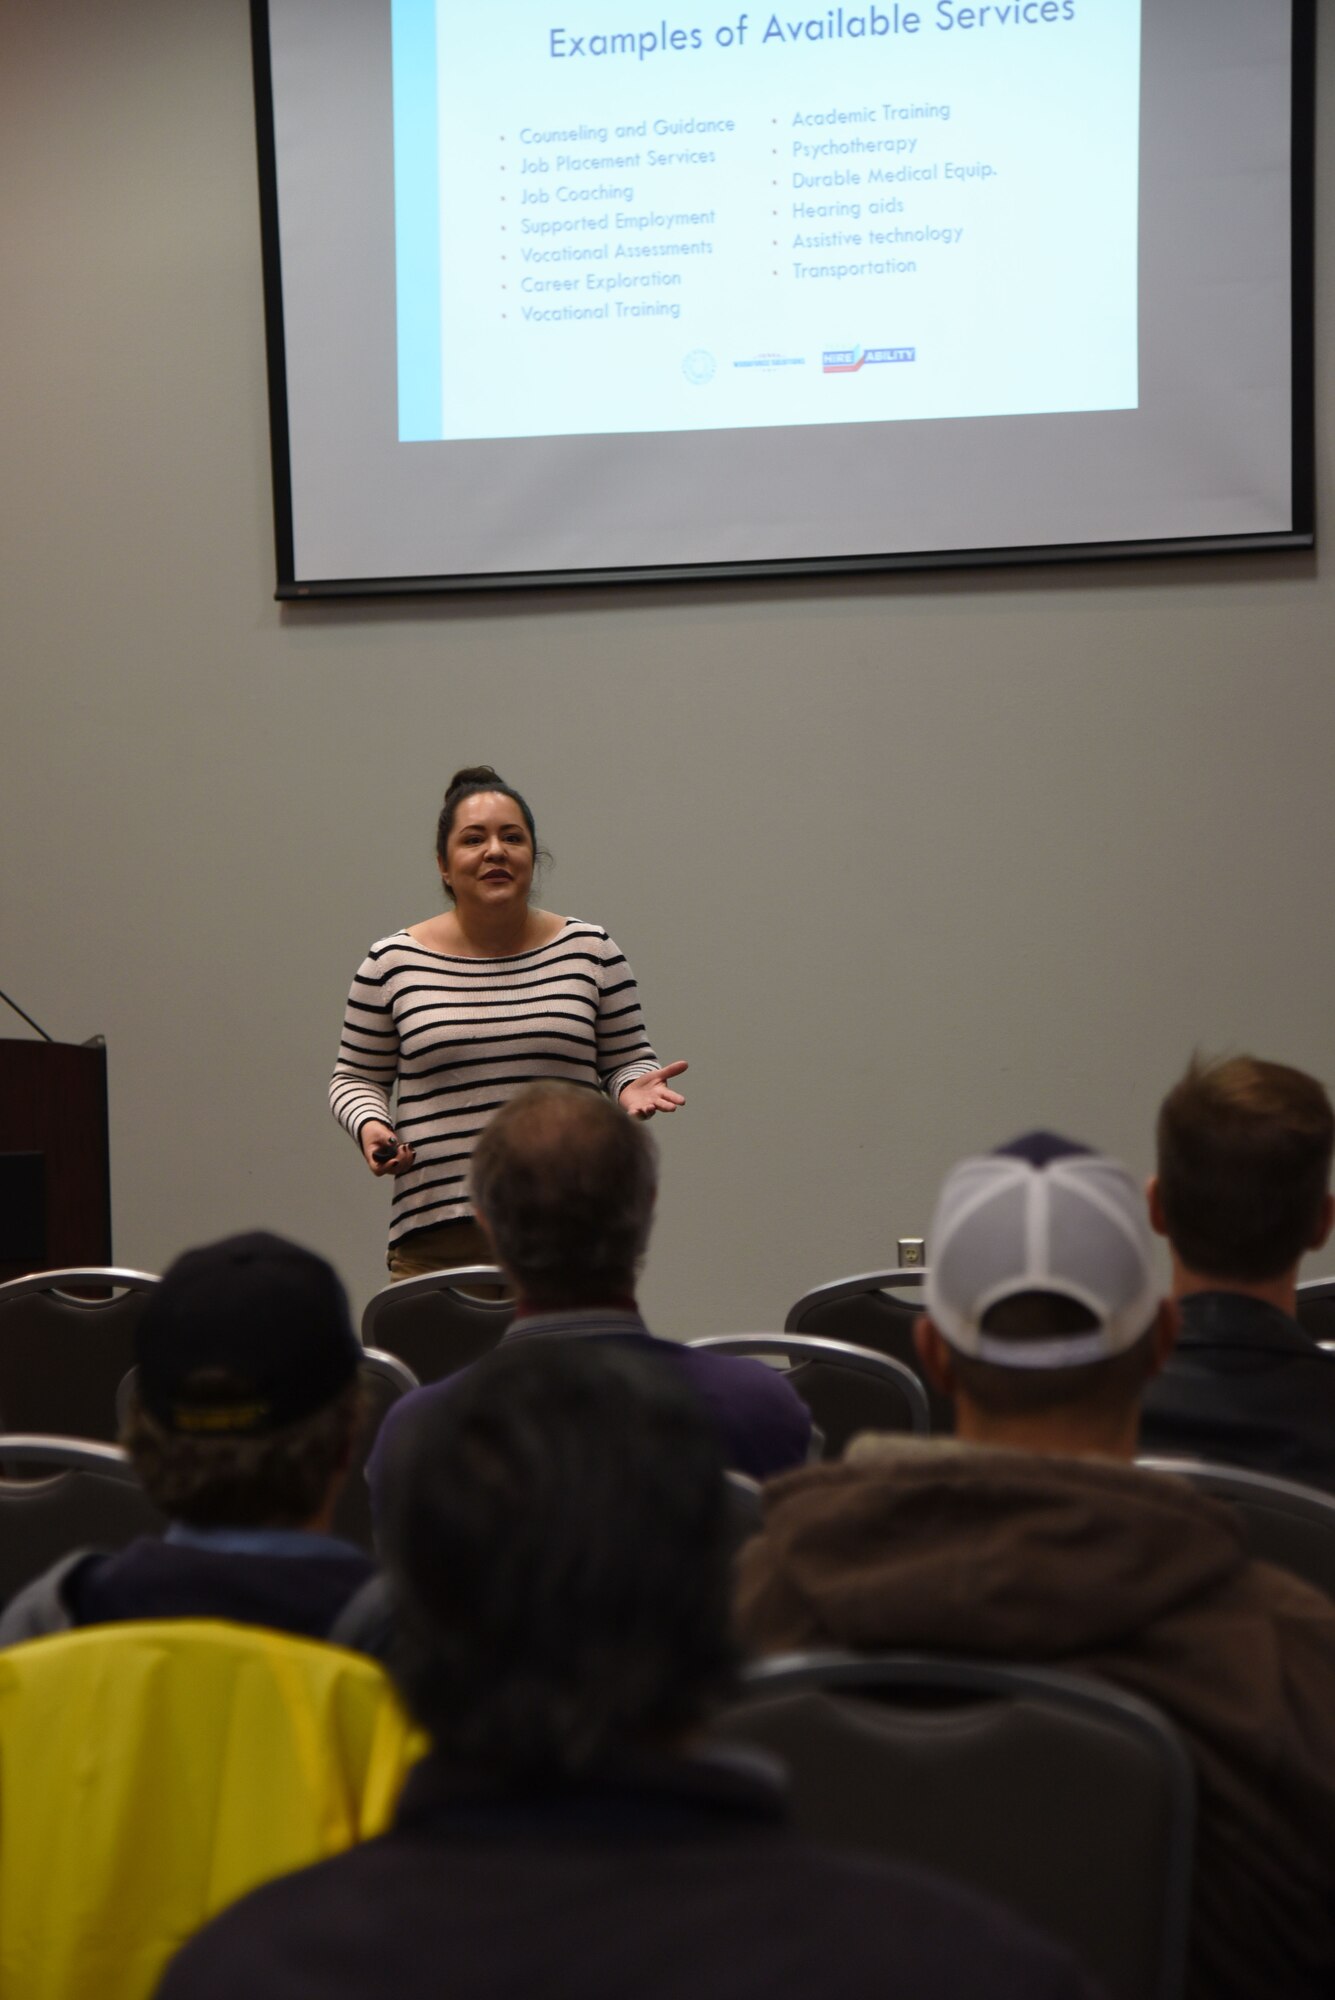 Vocational Rehabilitation Services Business Relations Coordinator, Felicia Patrick, speaks during the National Disability Employment Awareness Month info fair at the Event Center on Goodfellow Air Force Base, Texas, Oct. 17, 2018. Patrick told the audience how she could assist them with their disabilities in the workplace. (U.S. Air Force photo by Staff Sgt. Joshua Edwards/Released)